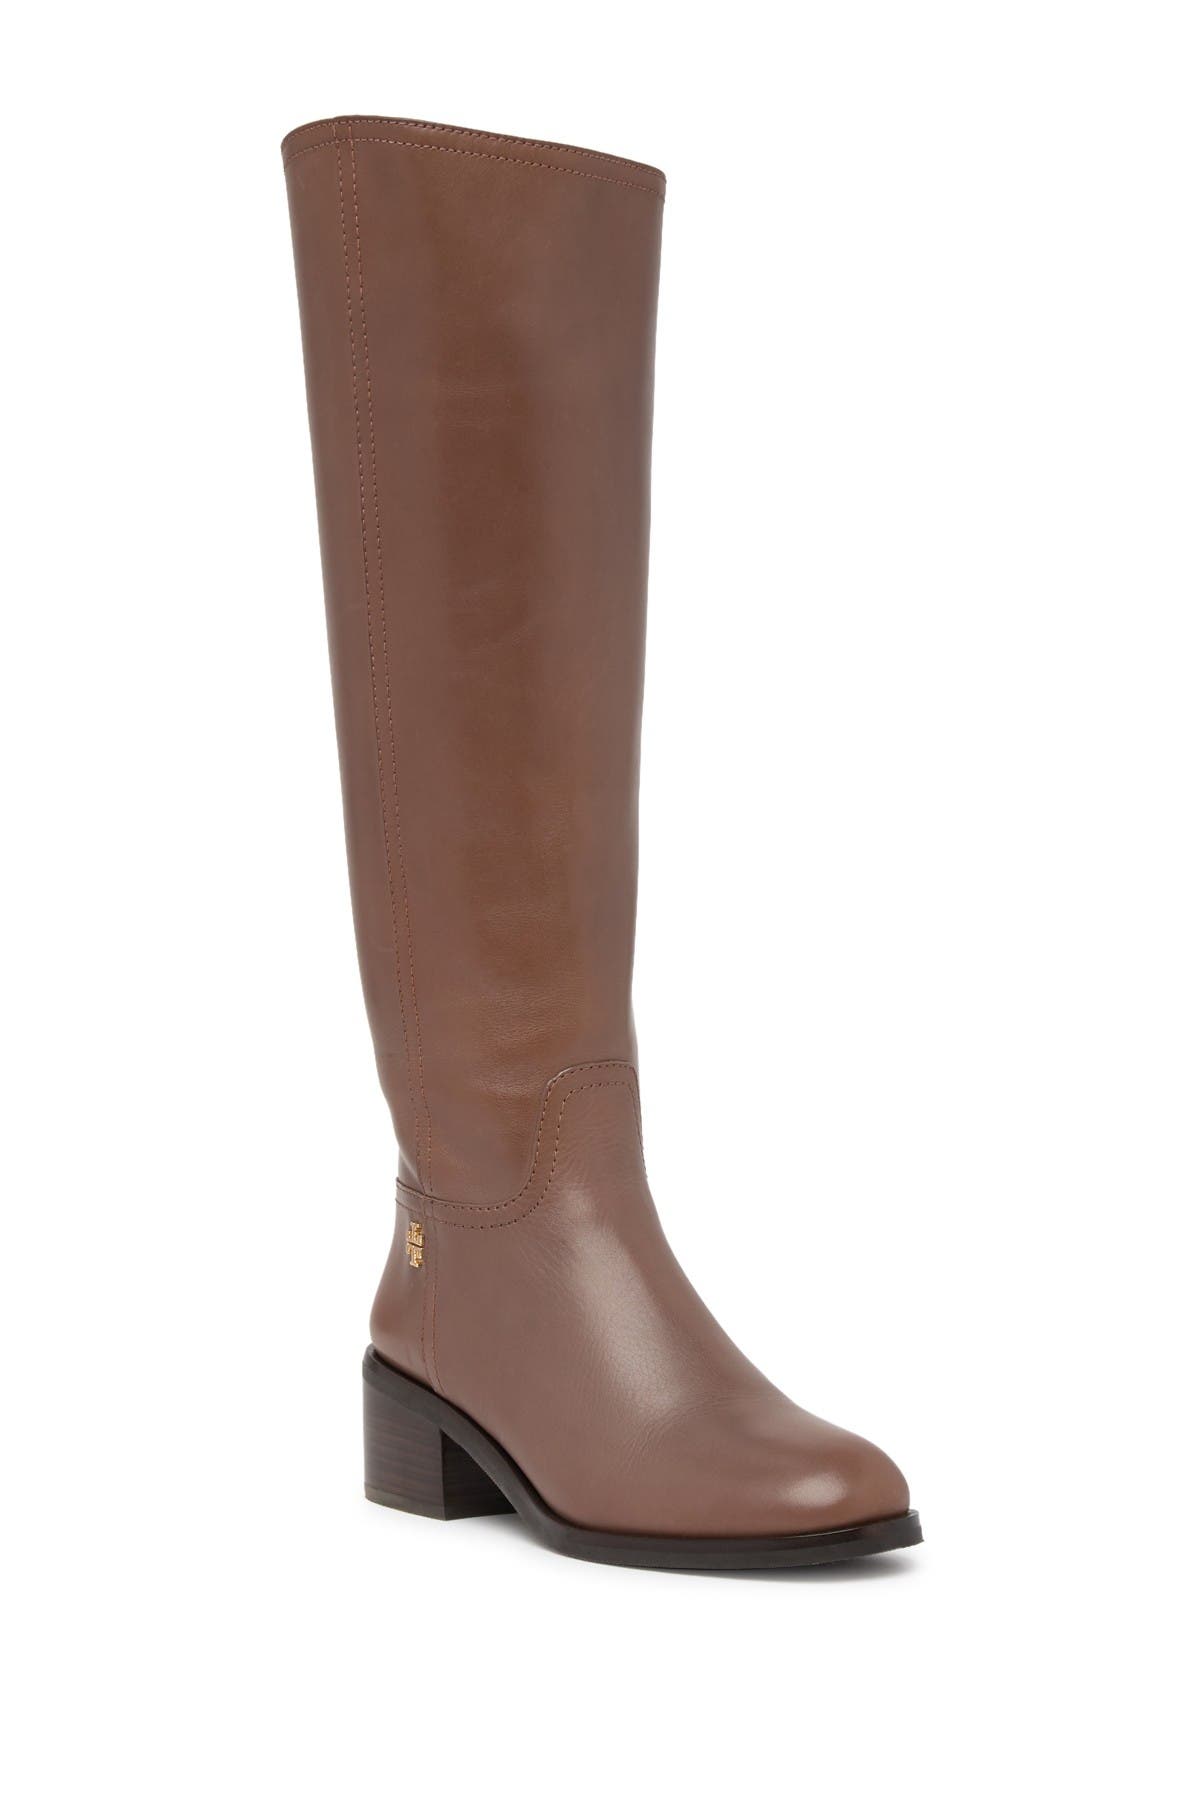 Tory Burch | Fulton Leather Boot 